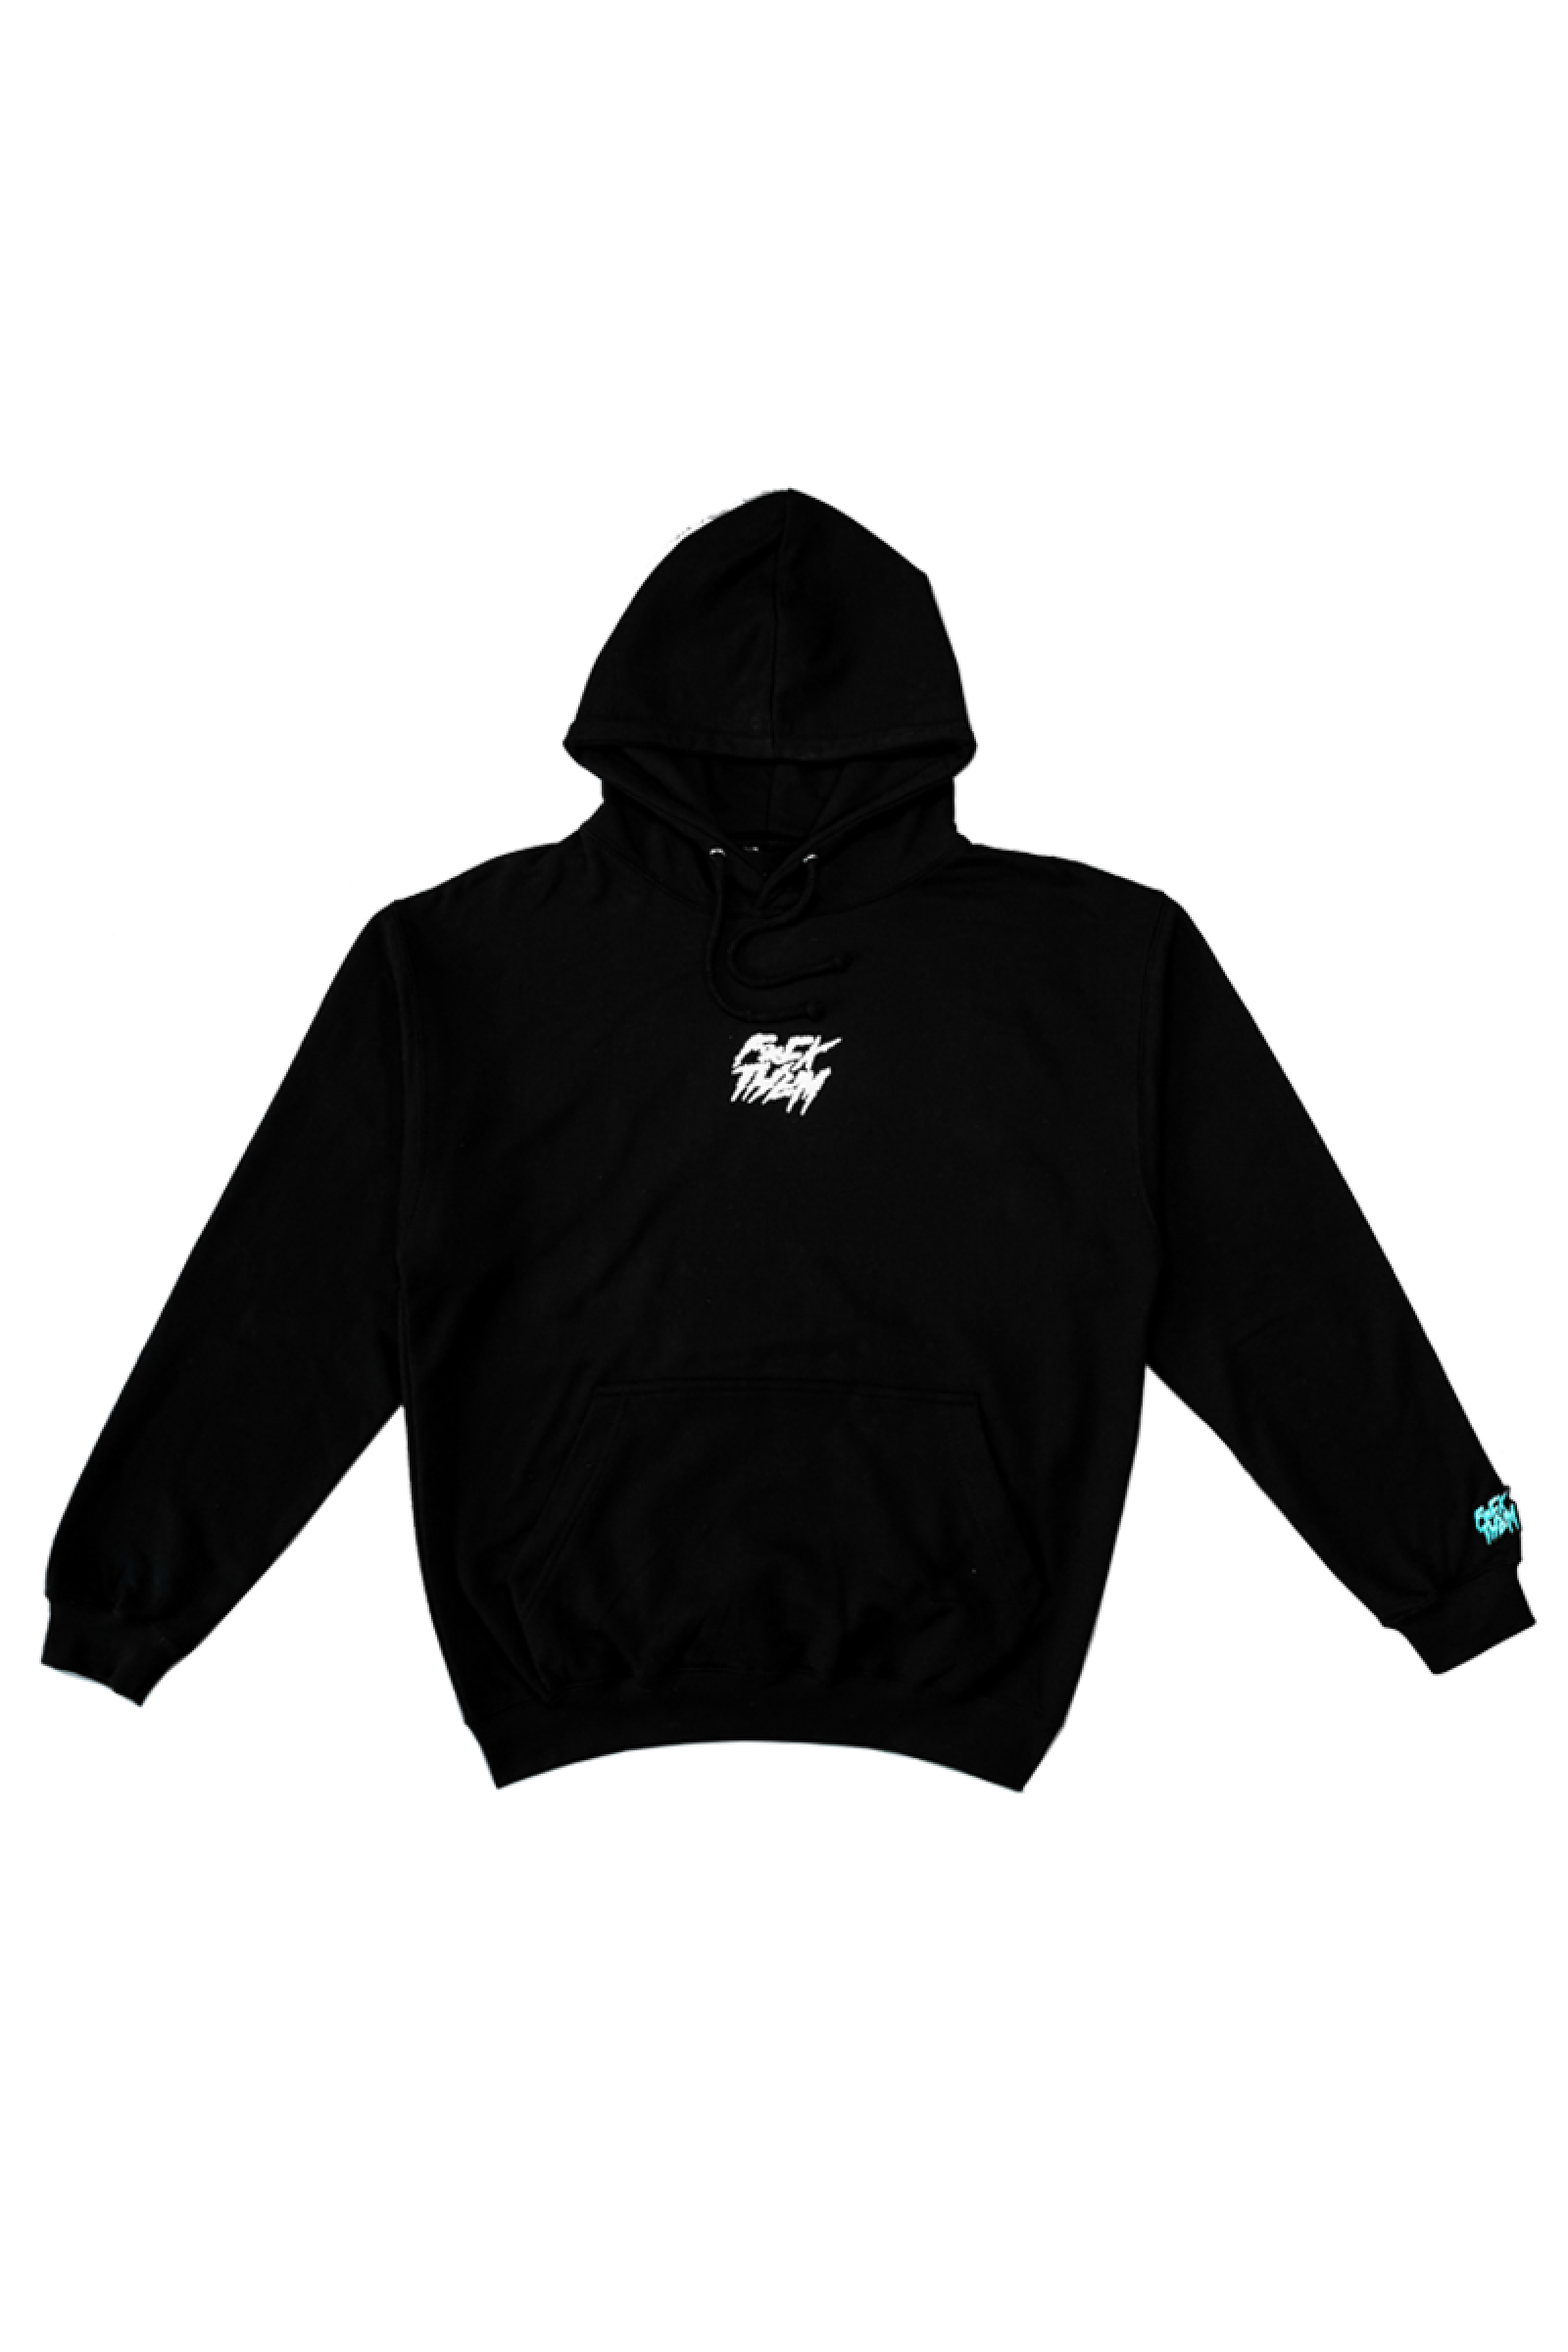 Welcome dig flap Basic black hoodie | F*CKTHEM OFFICIAL STORE